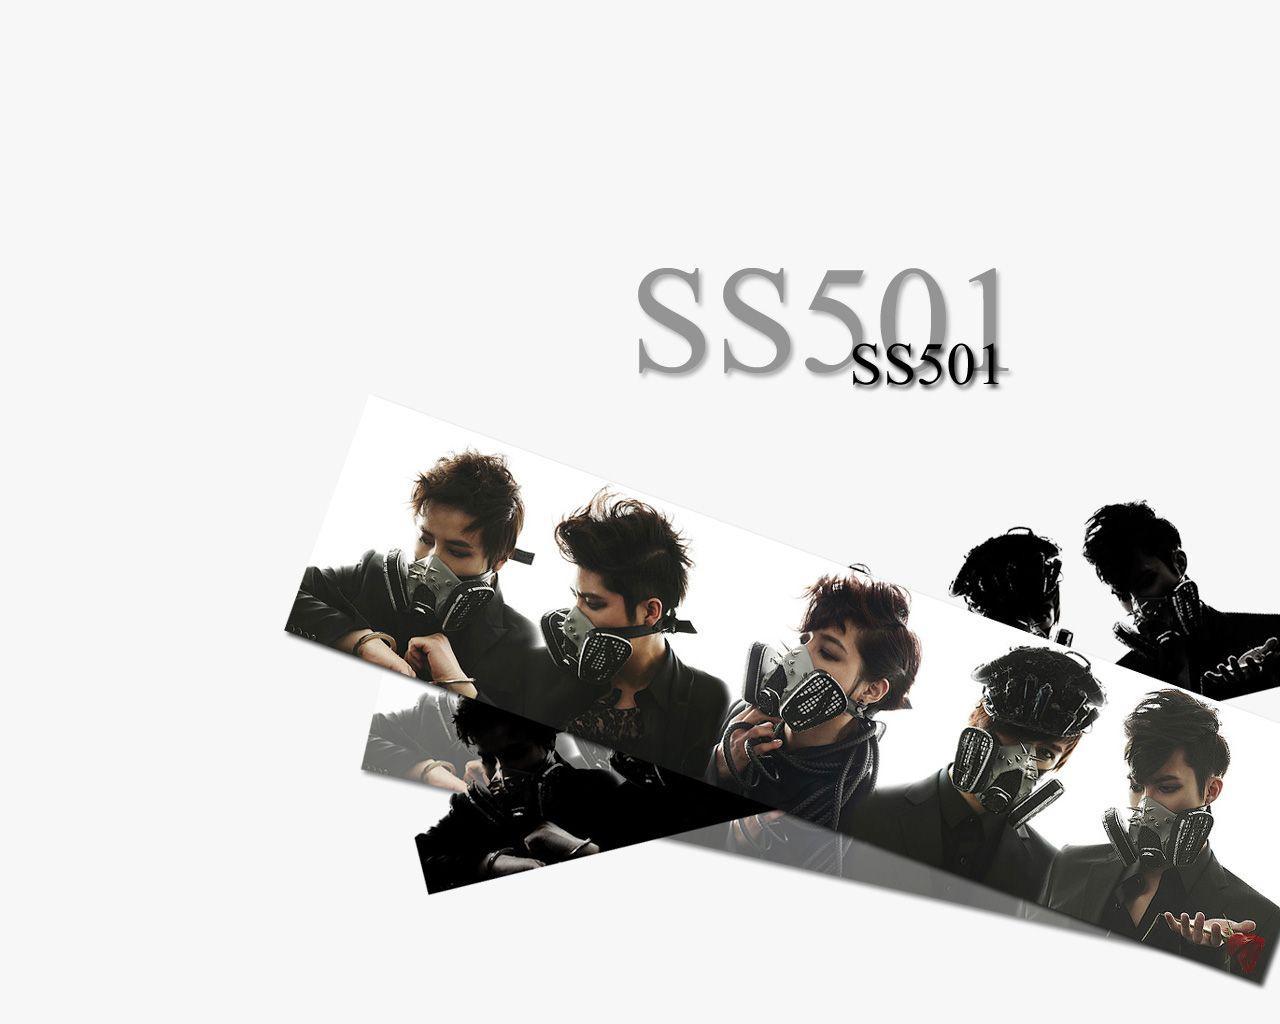 Wallpaper SS501 fanmade wallpaper for 501Day. Double S photo diary